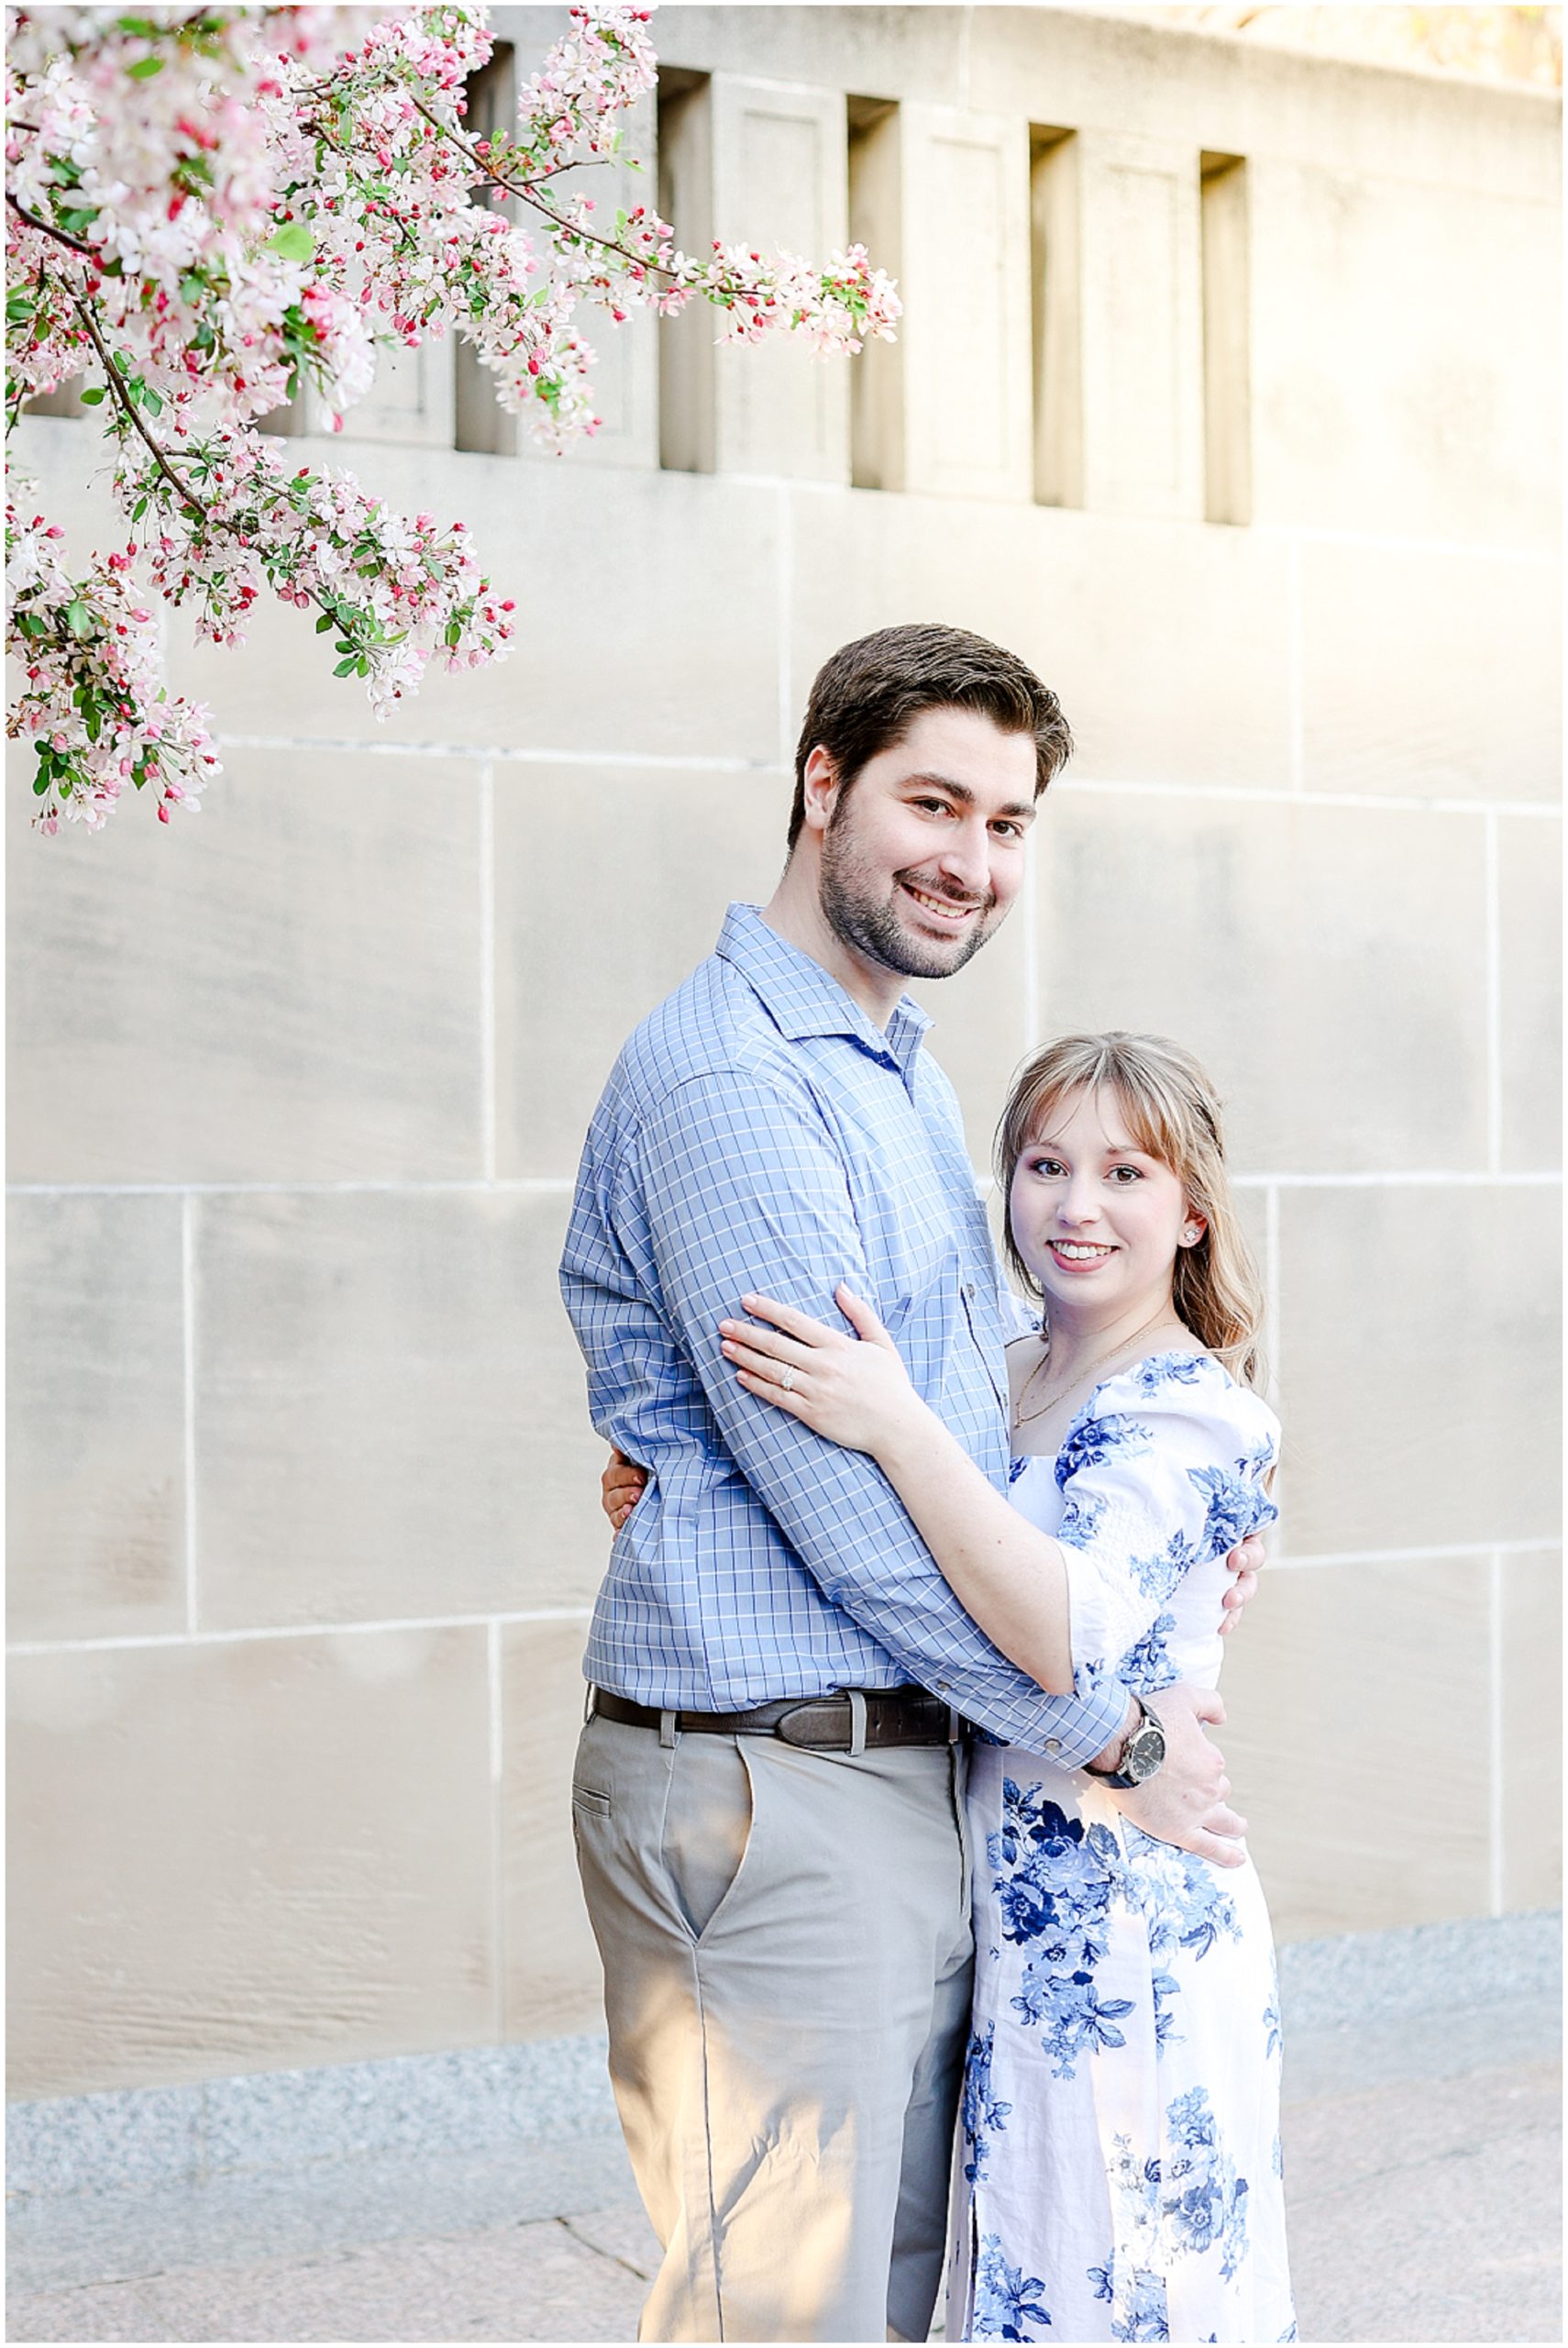 Look at what they wore for their engagement photos! Spring Engagement Photos with Ali & Connor at the Nelson Atkins Museum in Kansas City by best wedding photographer Mariam Saifan Photography - Engagement and Wedding Style Guide - What to Wear and Where to Take Your Photos in Kansas City 